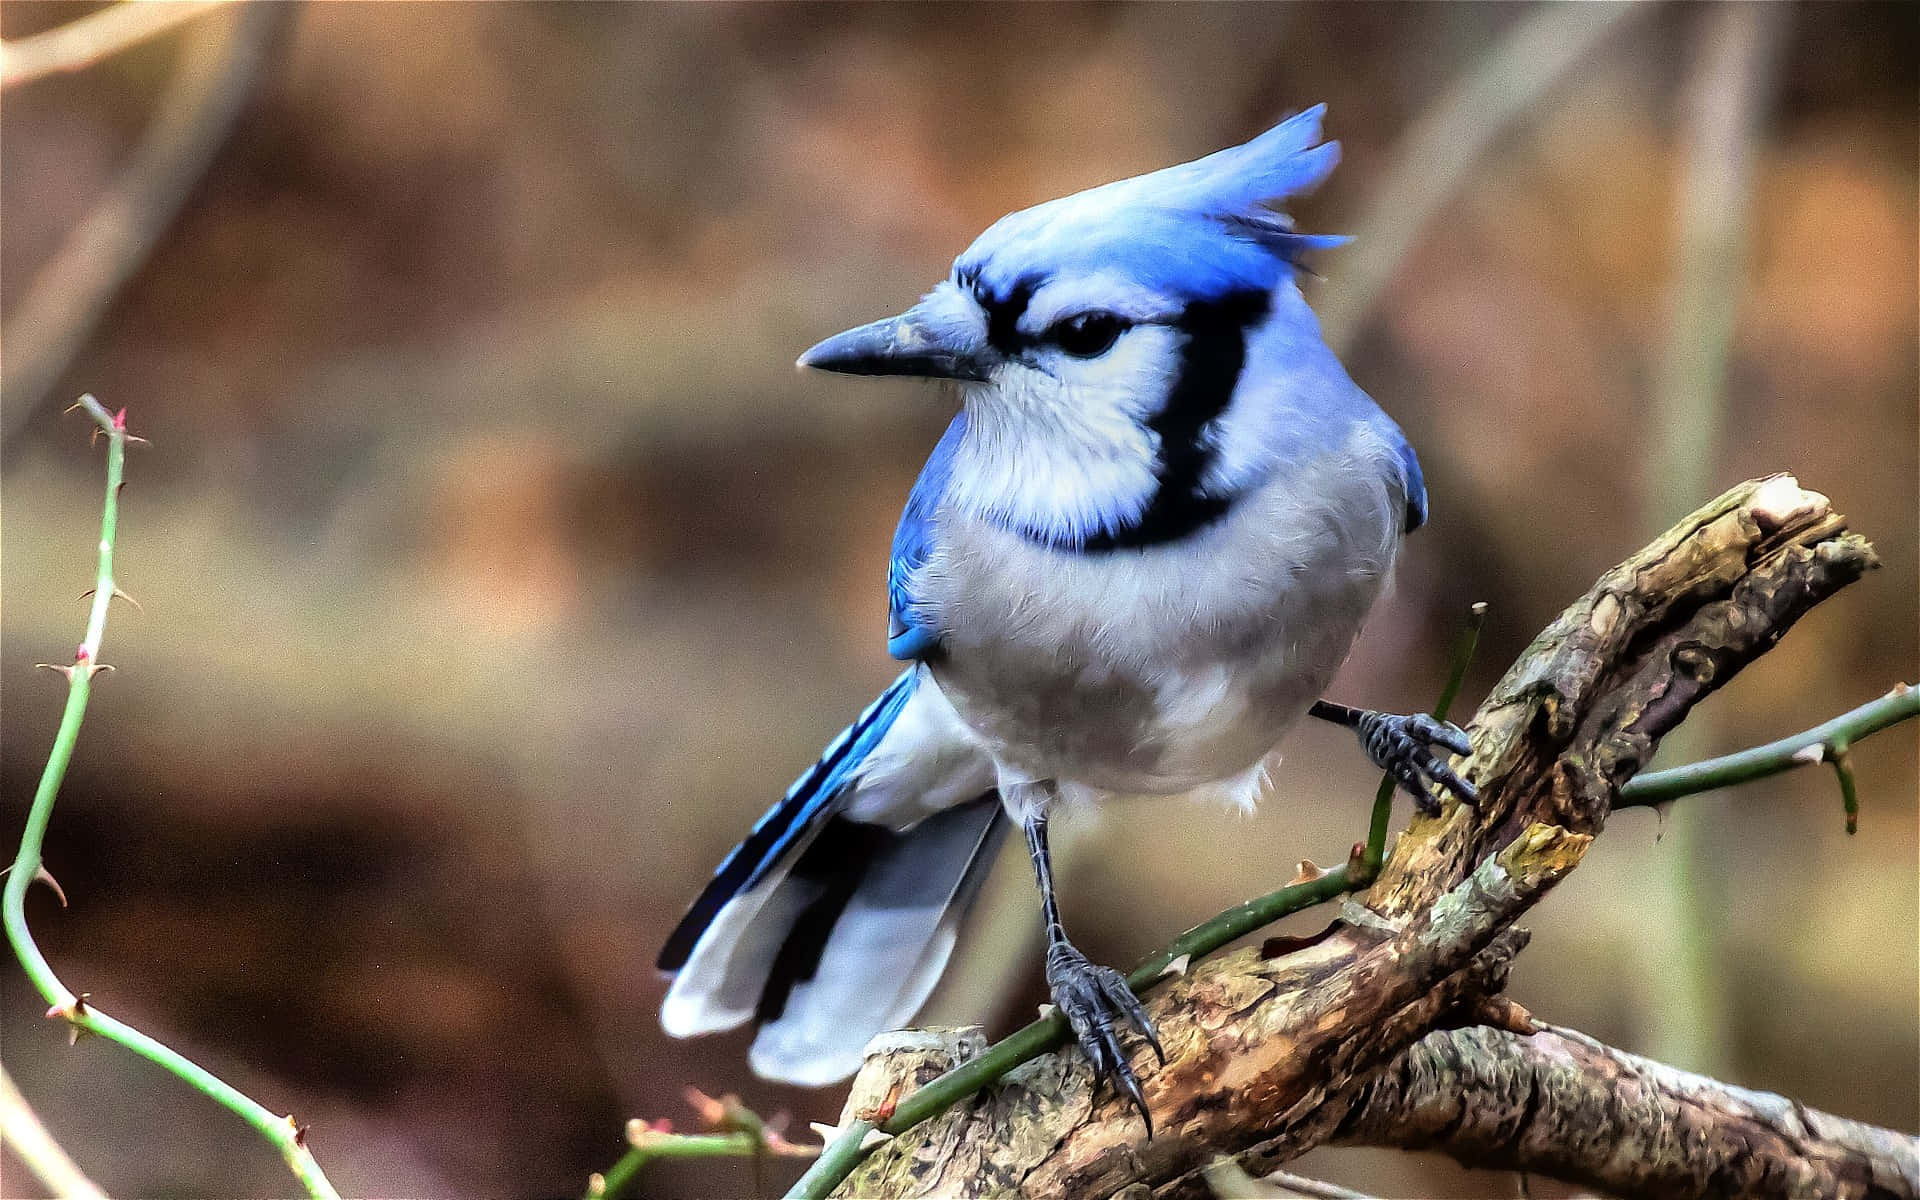 A Bright Blue Jay in Its Natural Habitat